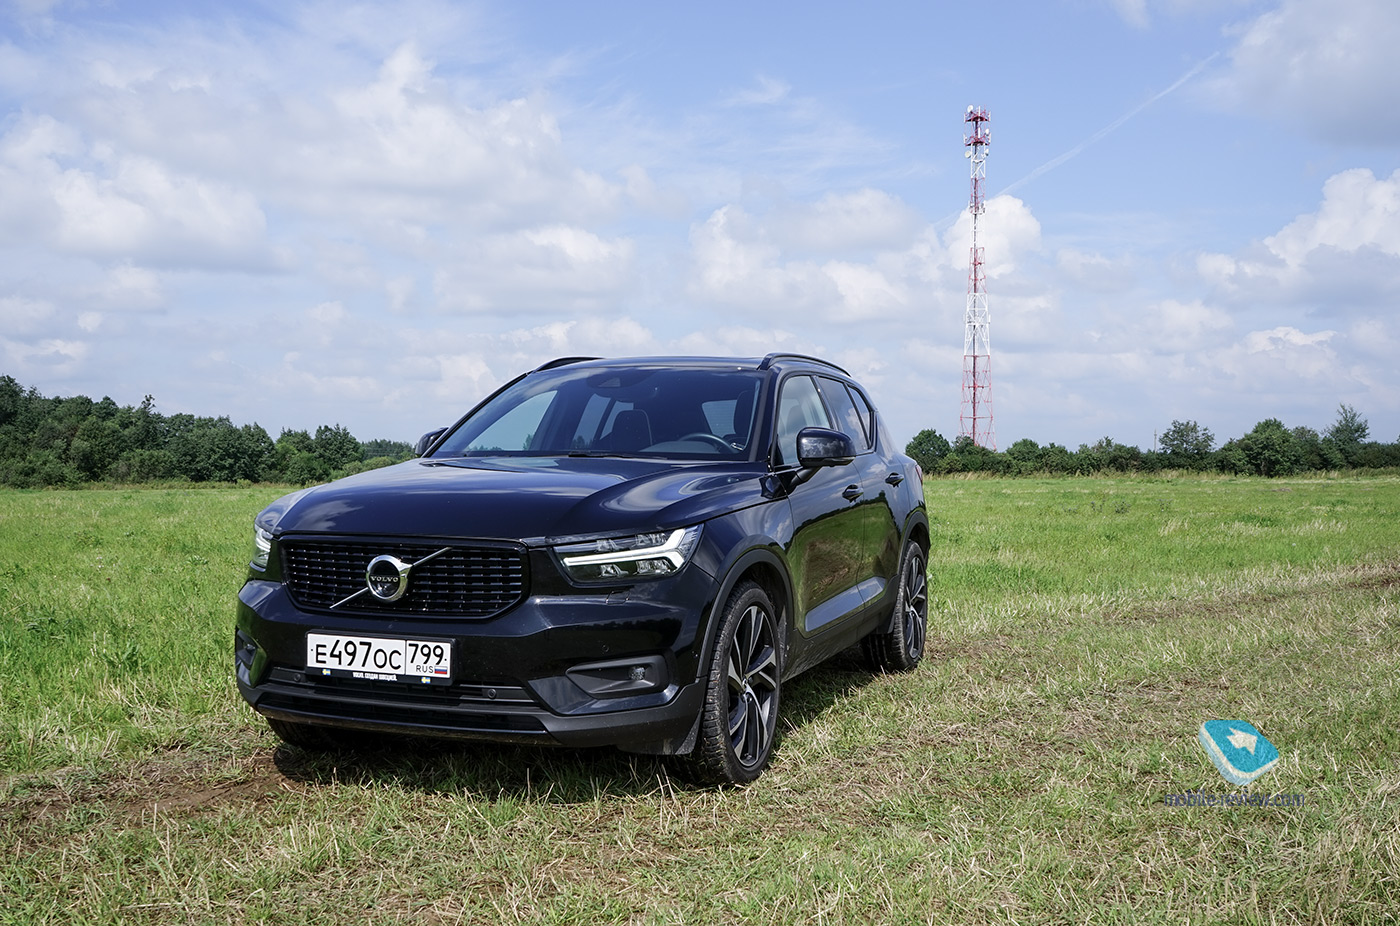 Volvo XC40 test. The best compact crossover?